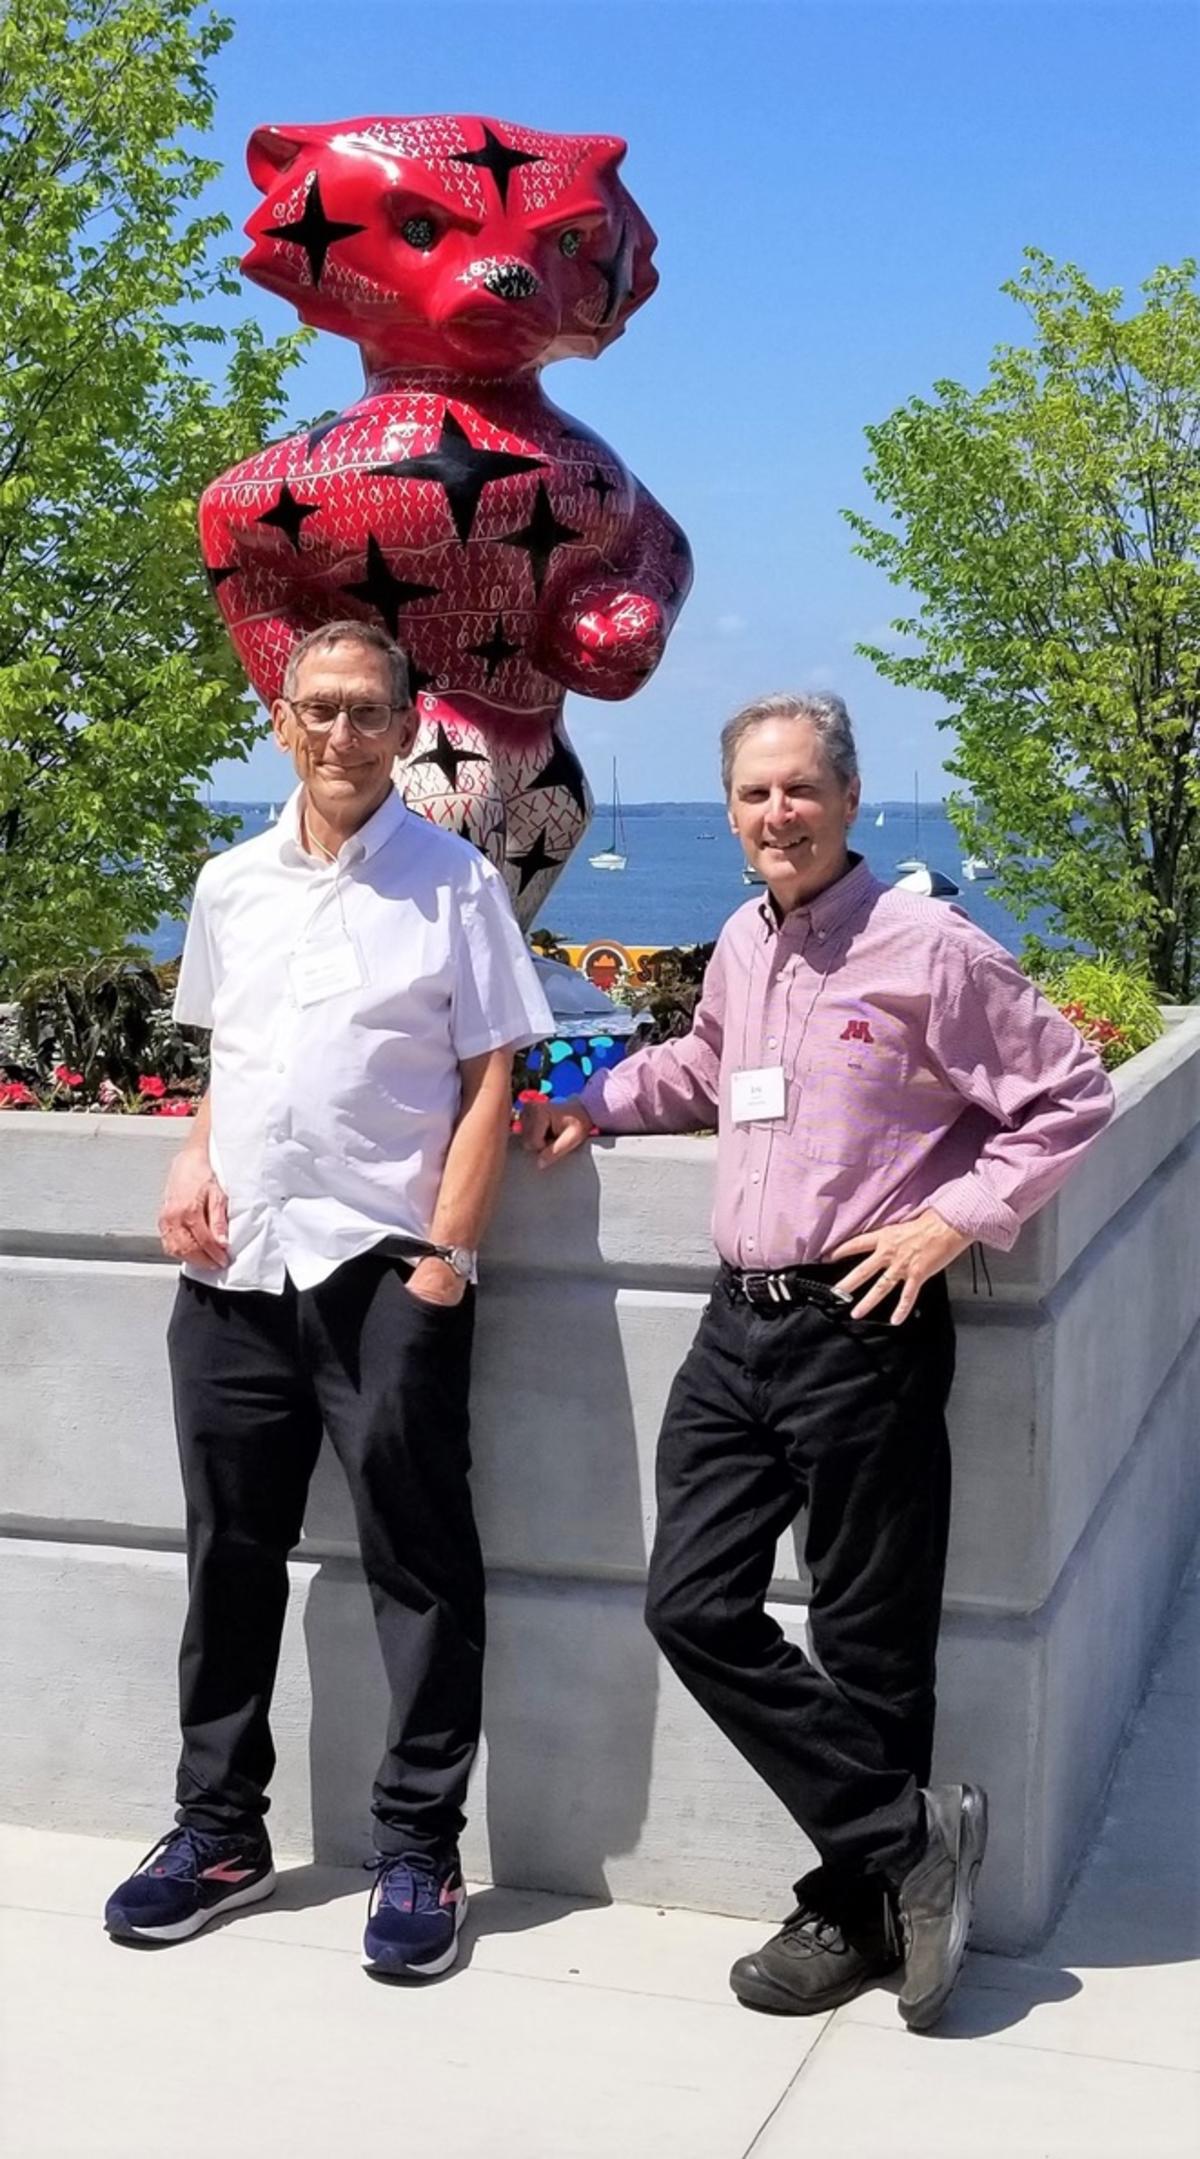 Ron Matross, left, and Eric Hockert, at the 2023 Big Ten Retirees Association conference, hosted by the University of Wisconsin-Madison.